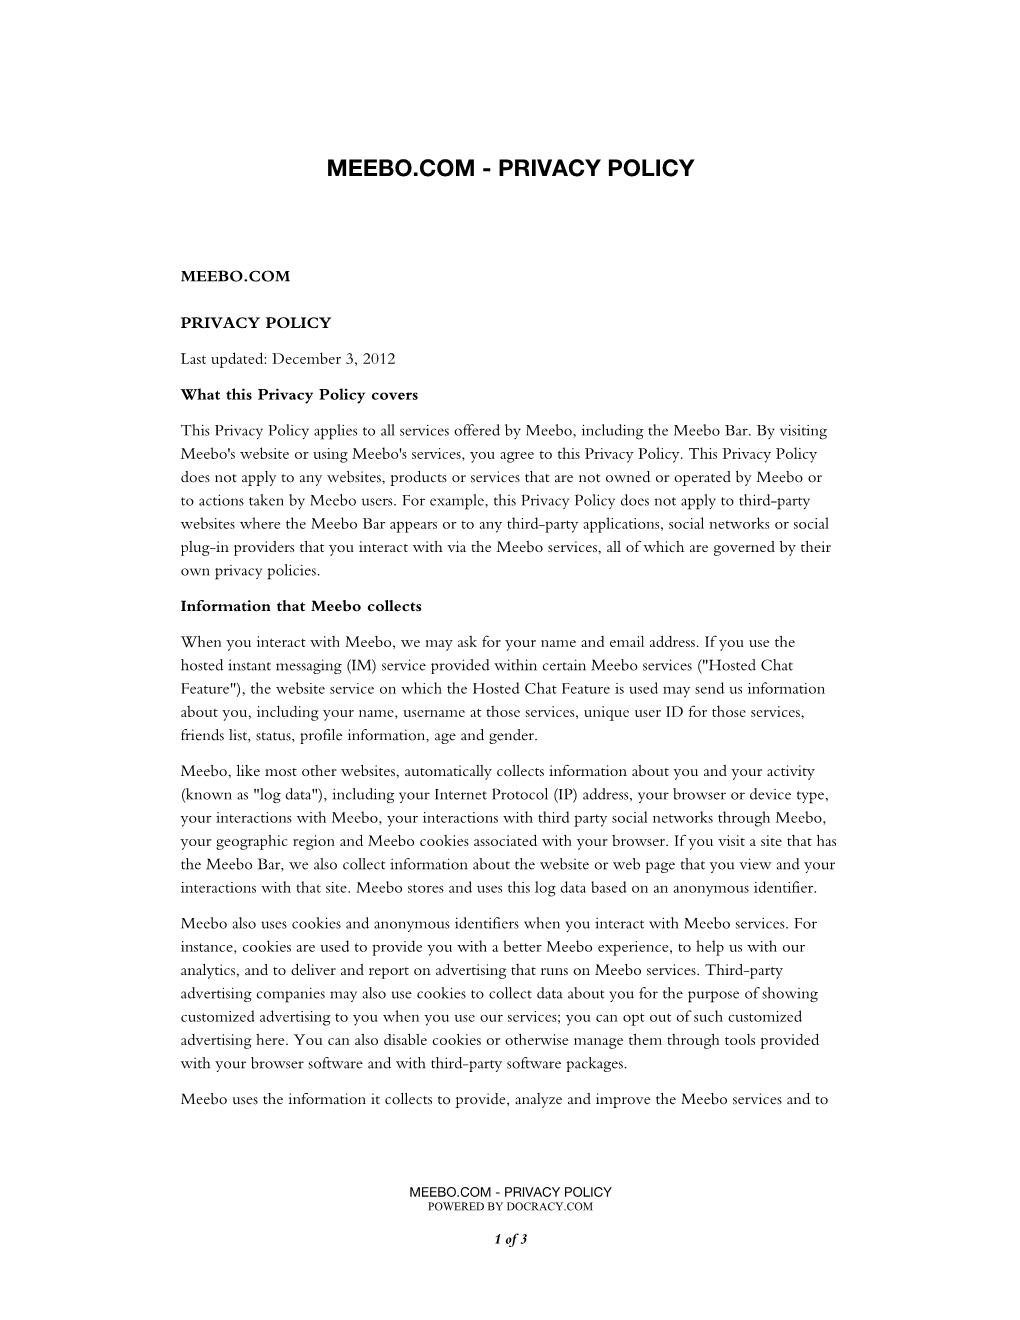 Meebo.Com - Privacy Policy